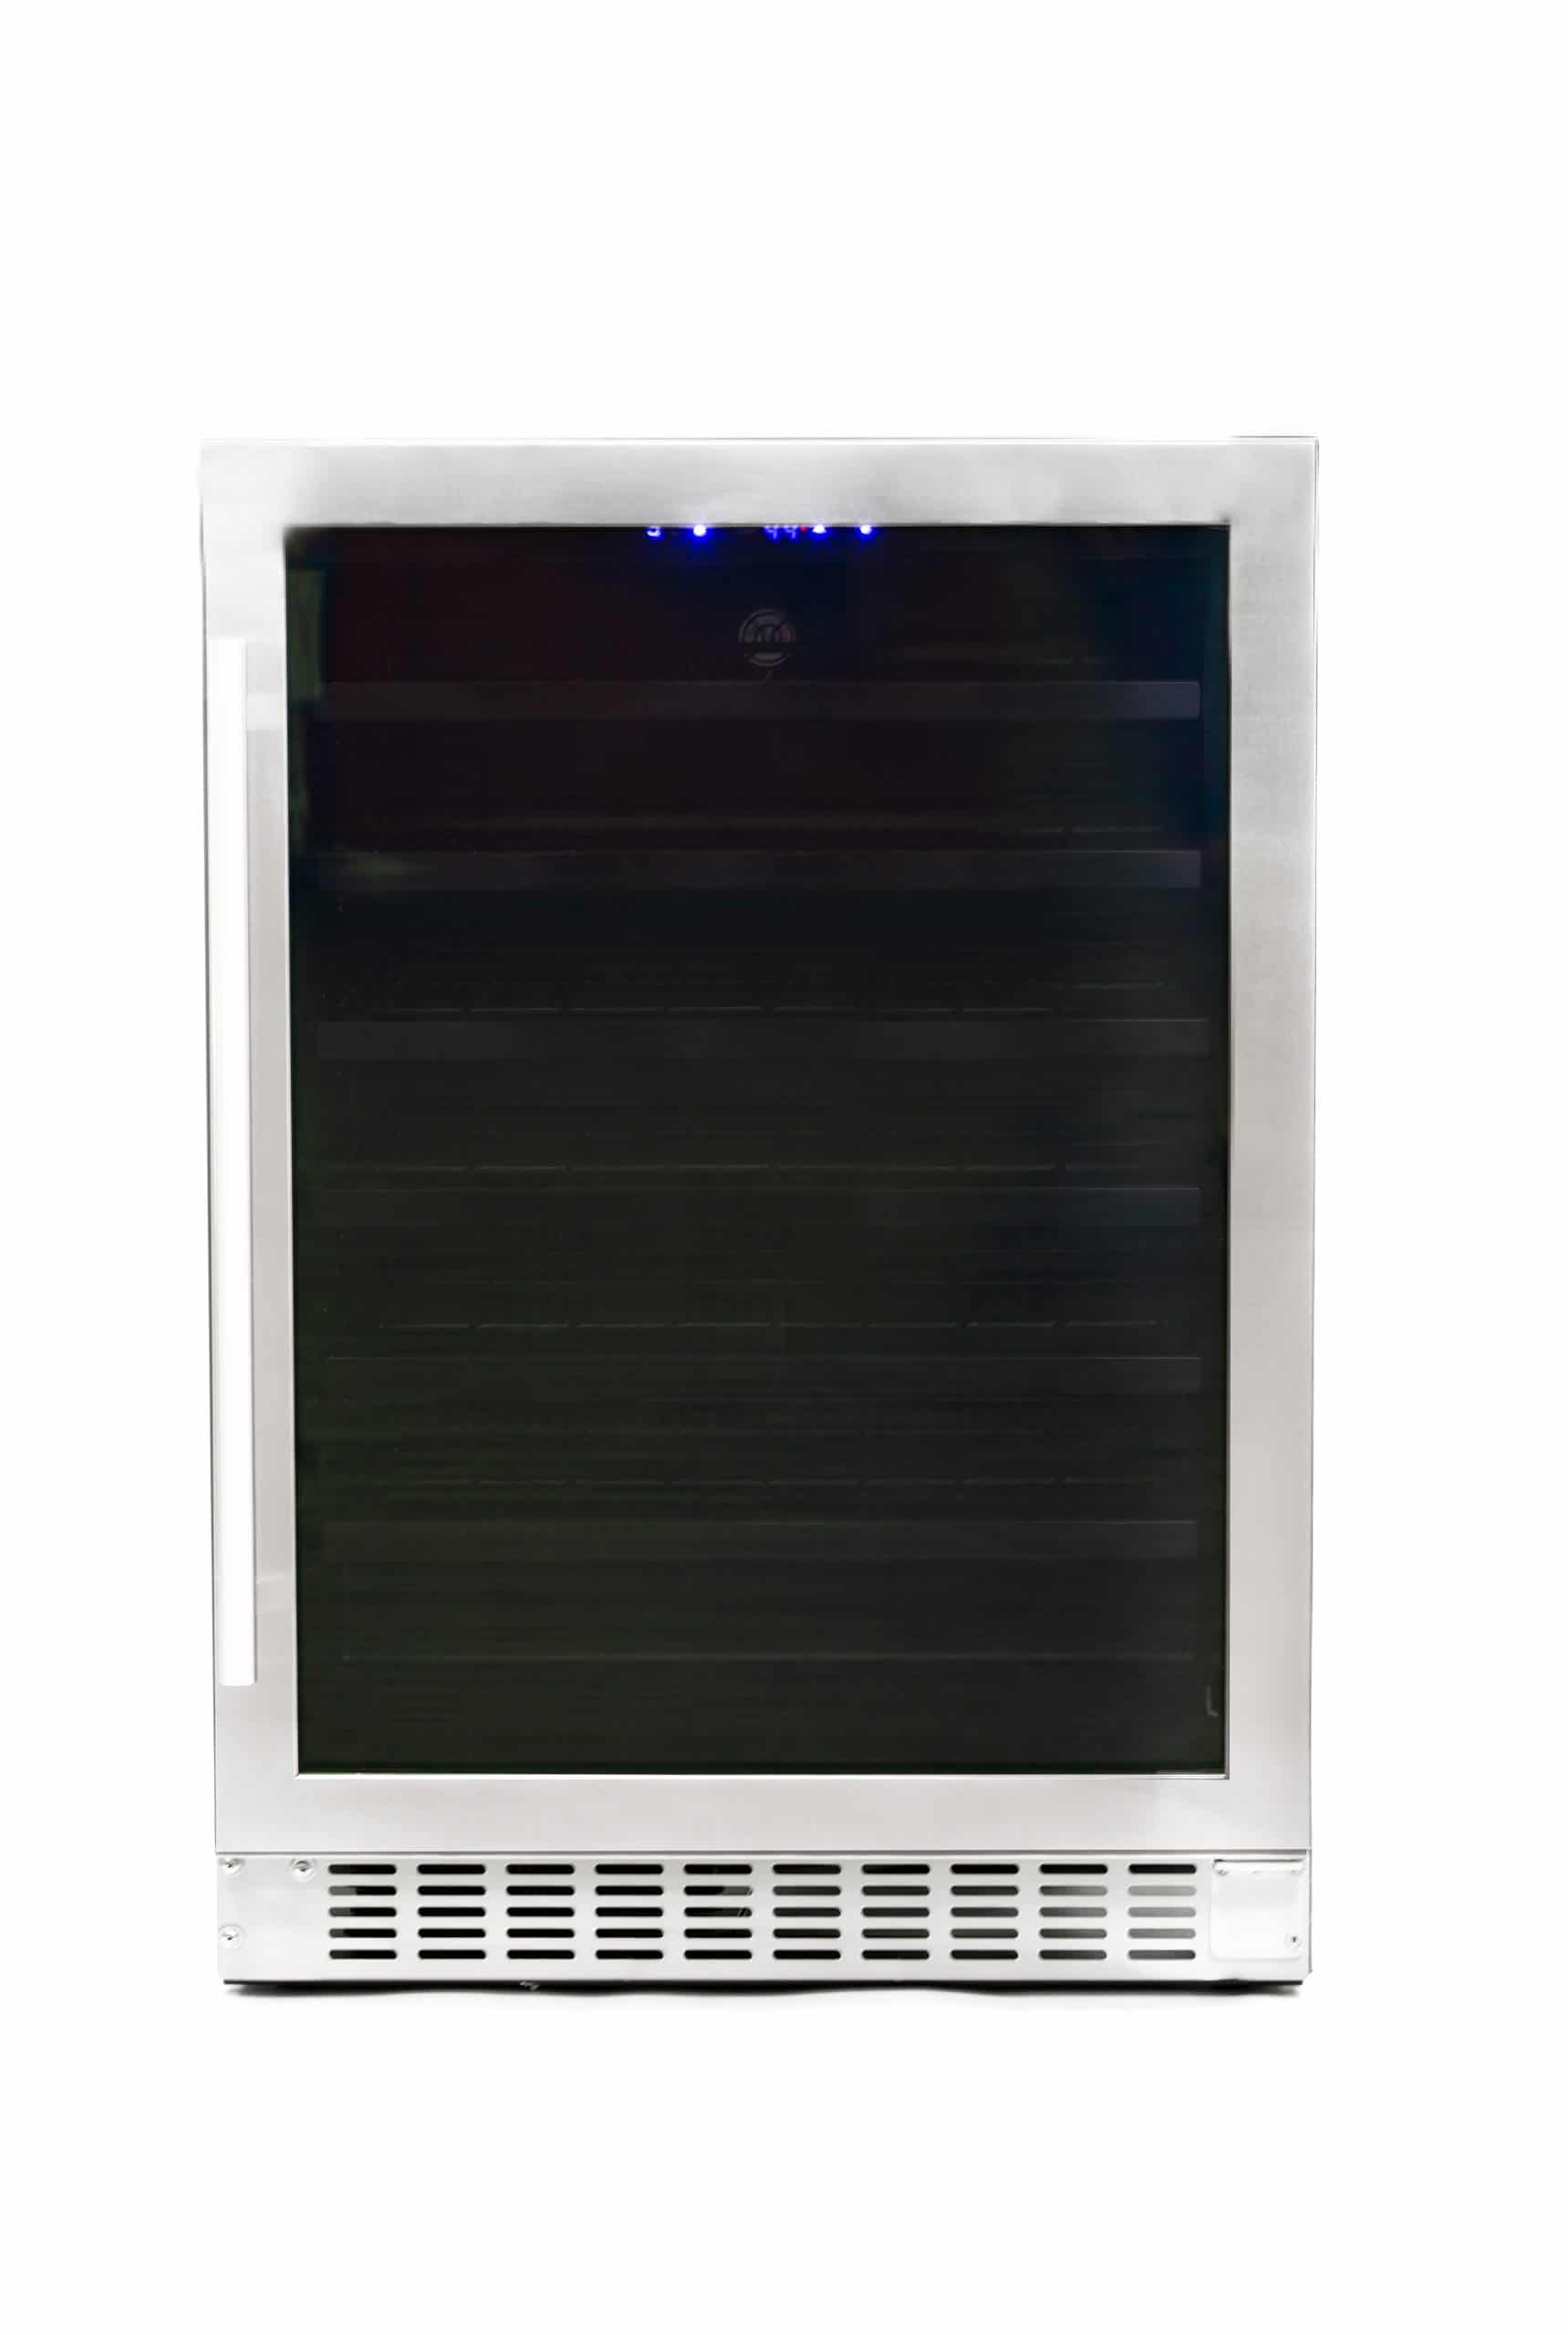 Azure 24" Wine Center with Stainless Trim Glass Door Front View